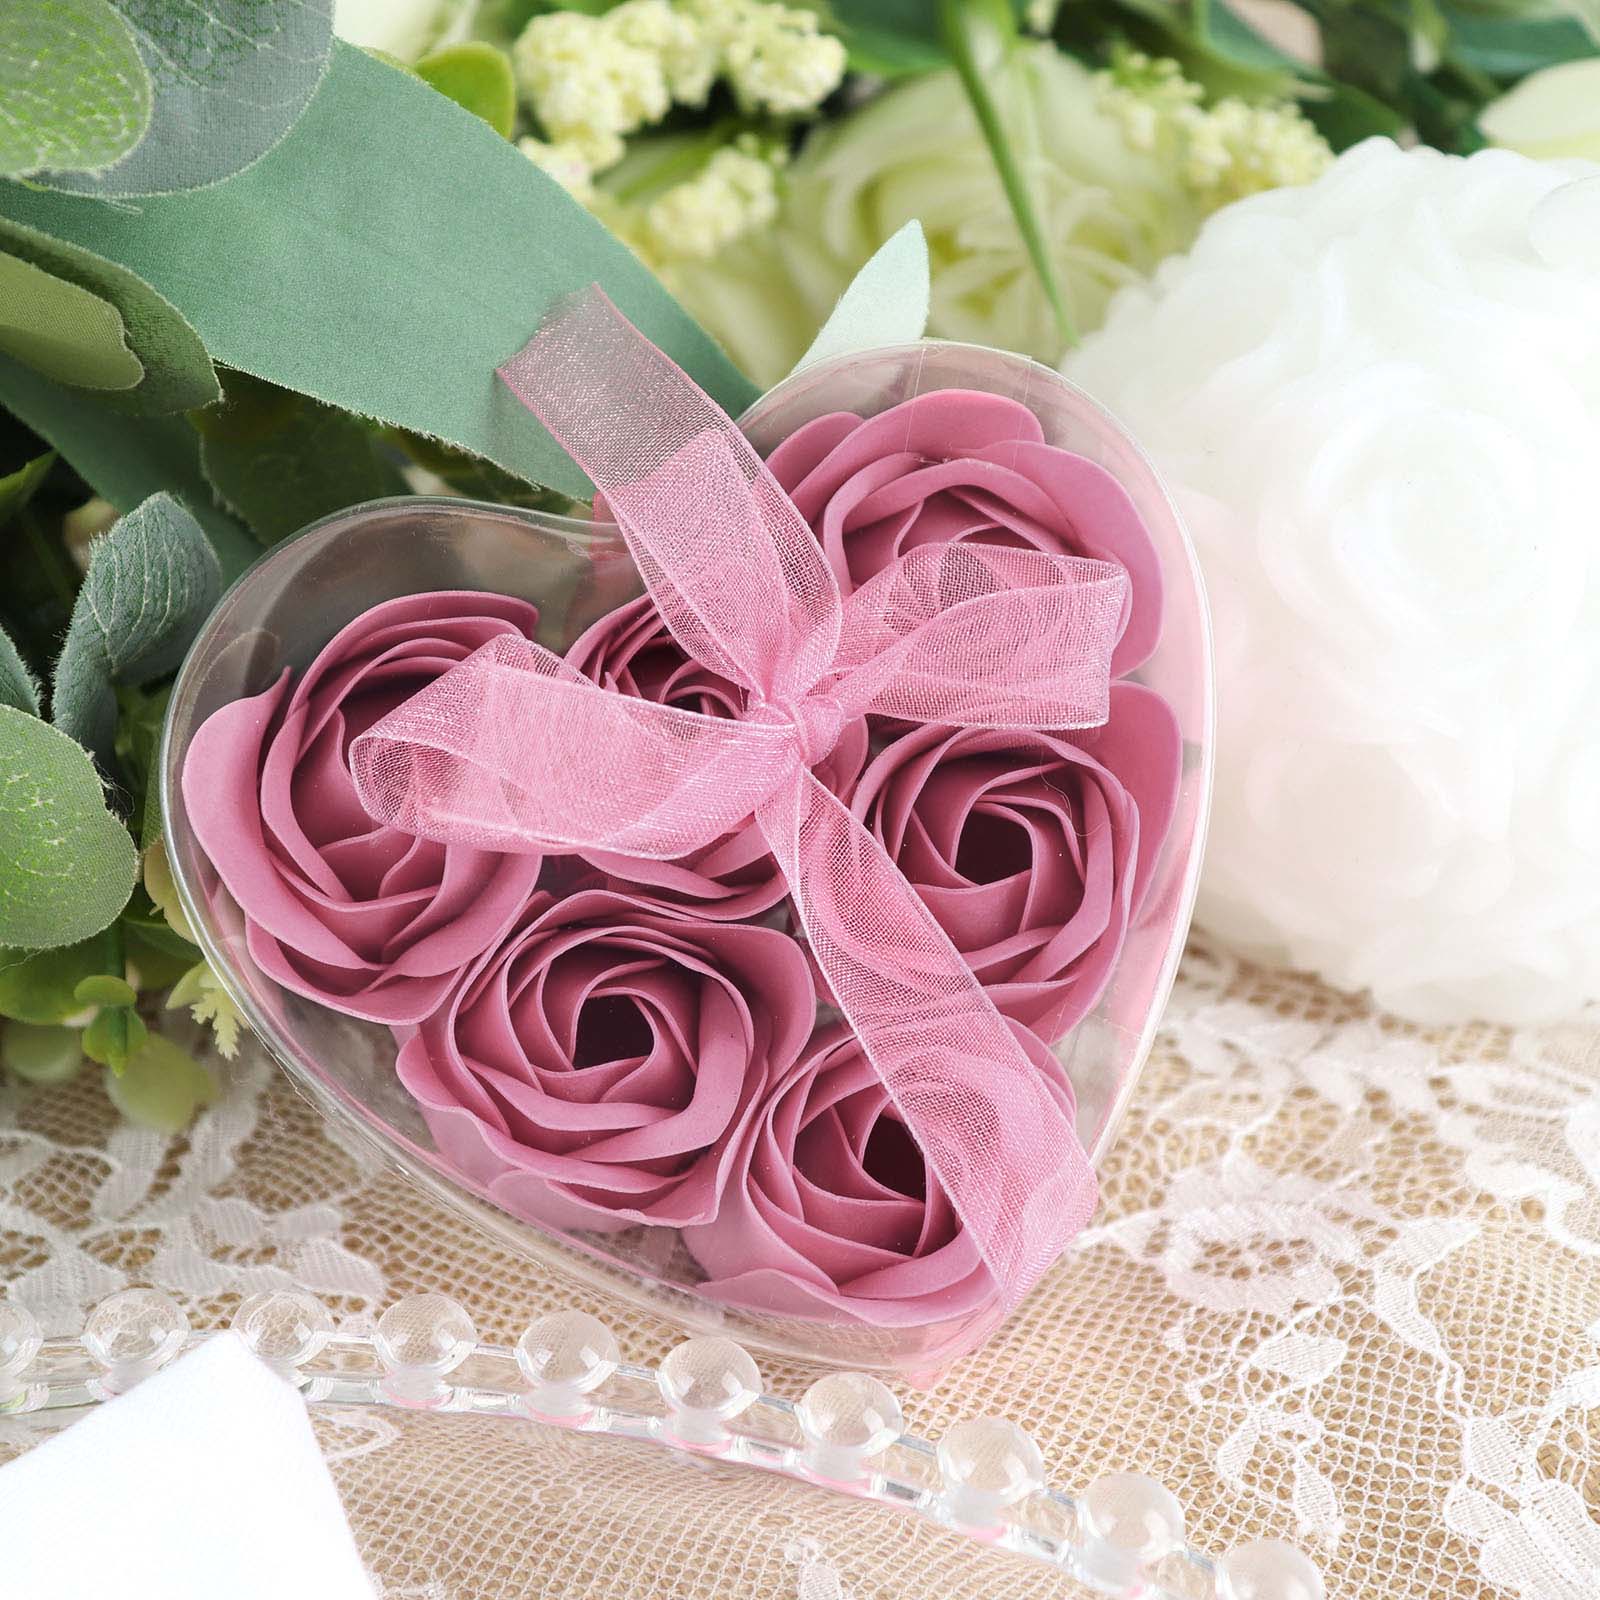 4 Pack | 24 Pcs Dusty Rose Scented Rose Soap Heart Shaped Party Favors with Gift Boxes and Ribbon | by Tableclothsfactory